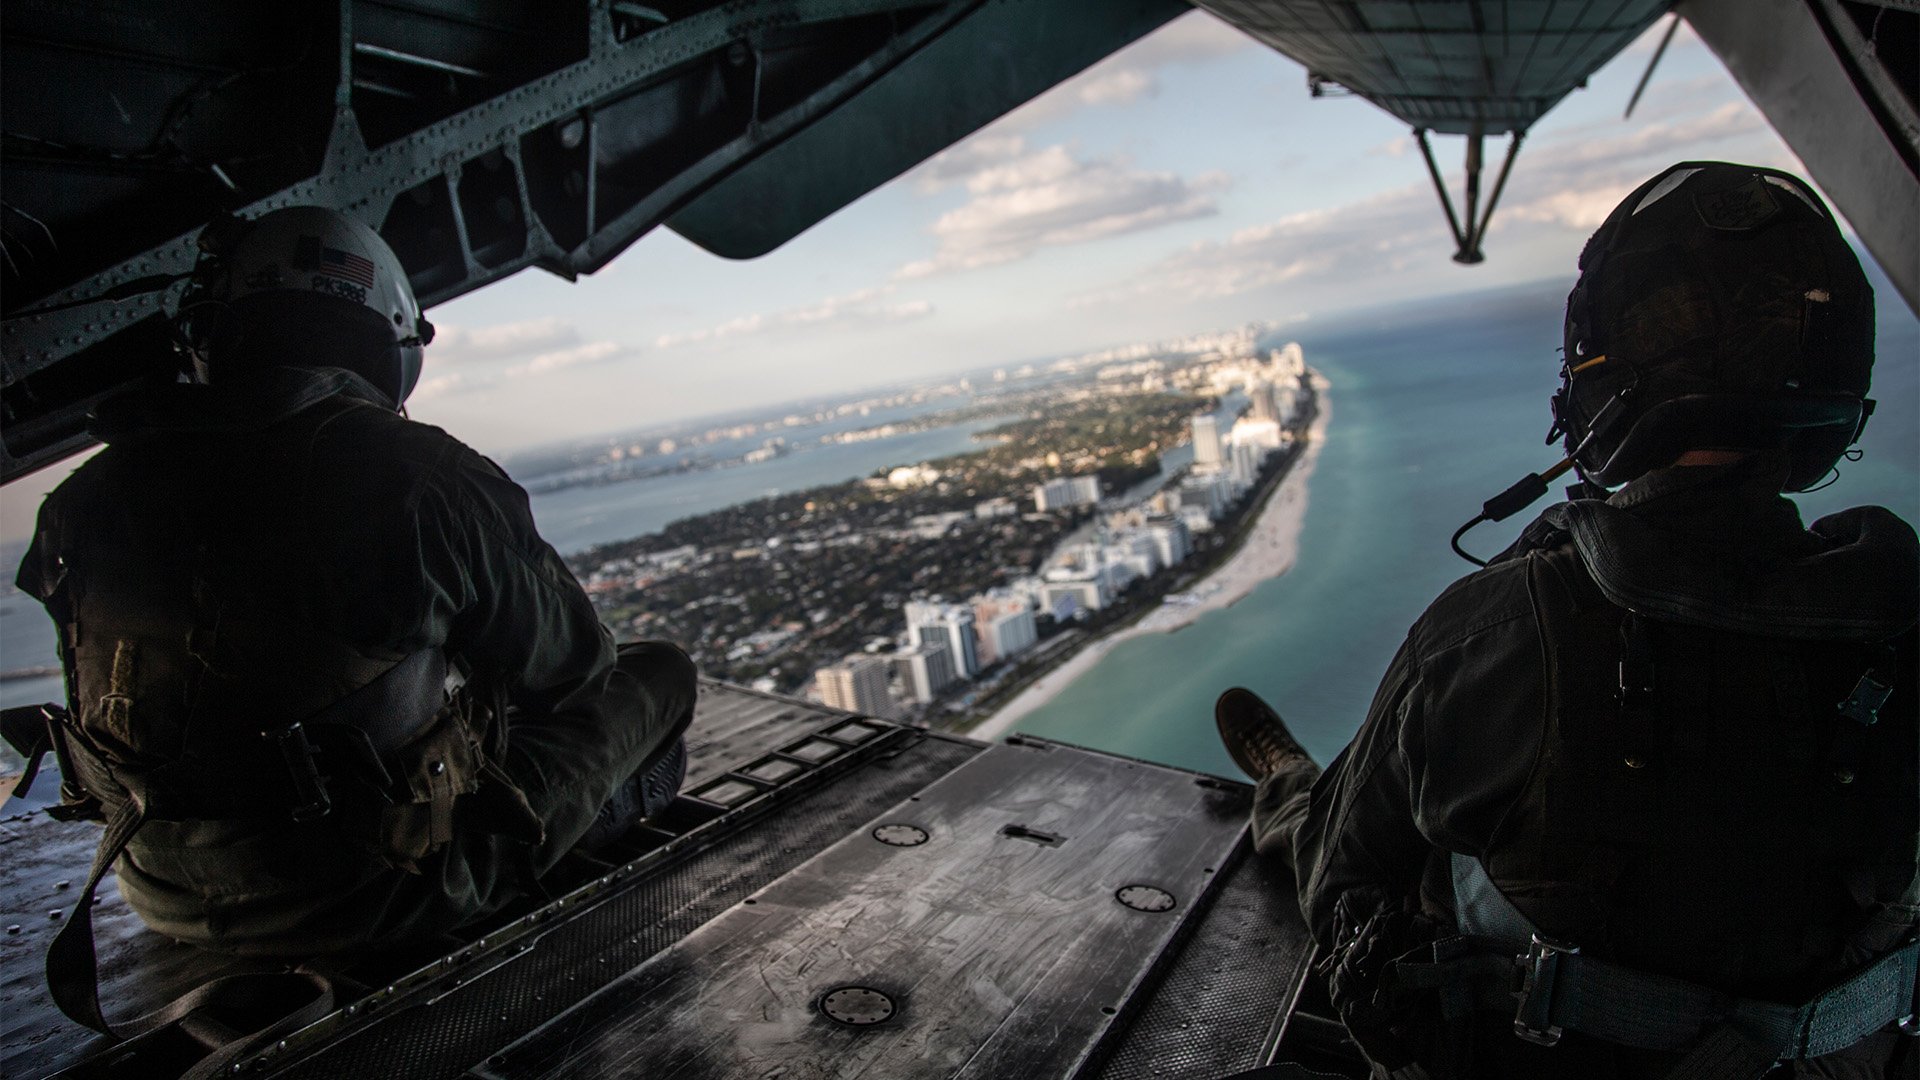 A CH-53E Super Stallion helicopter from the "Condors" of Marine Heavy Helicopter Squadron 464 wheels over Miami, Florida, on Dec. 2, 2021. Four months later, a Super Stallion in the squadron suffered a Class A mishap tied to a busted rotor. That triggered a command probe into what when wrong, and why. US Marine Corps photo by Lance Cpl. Christopher Hernandez.